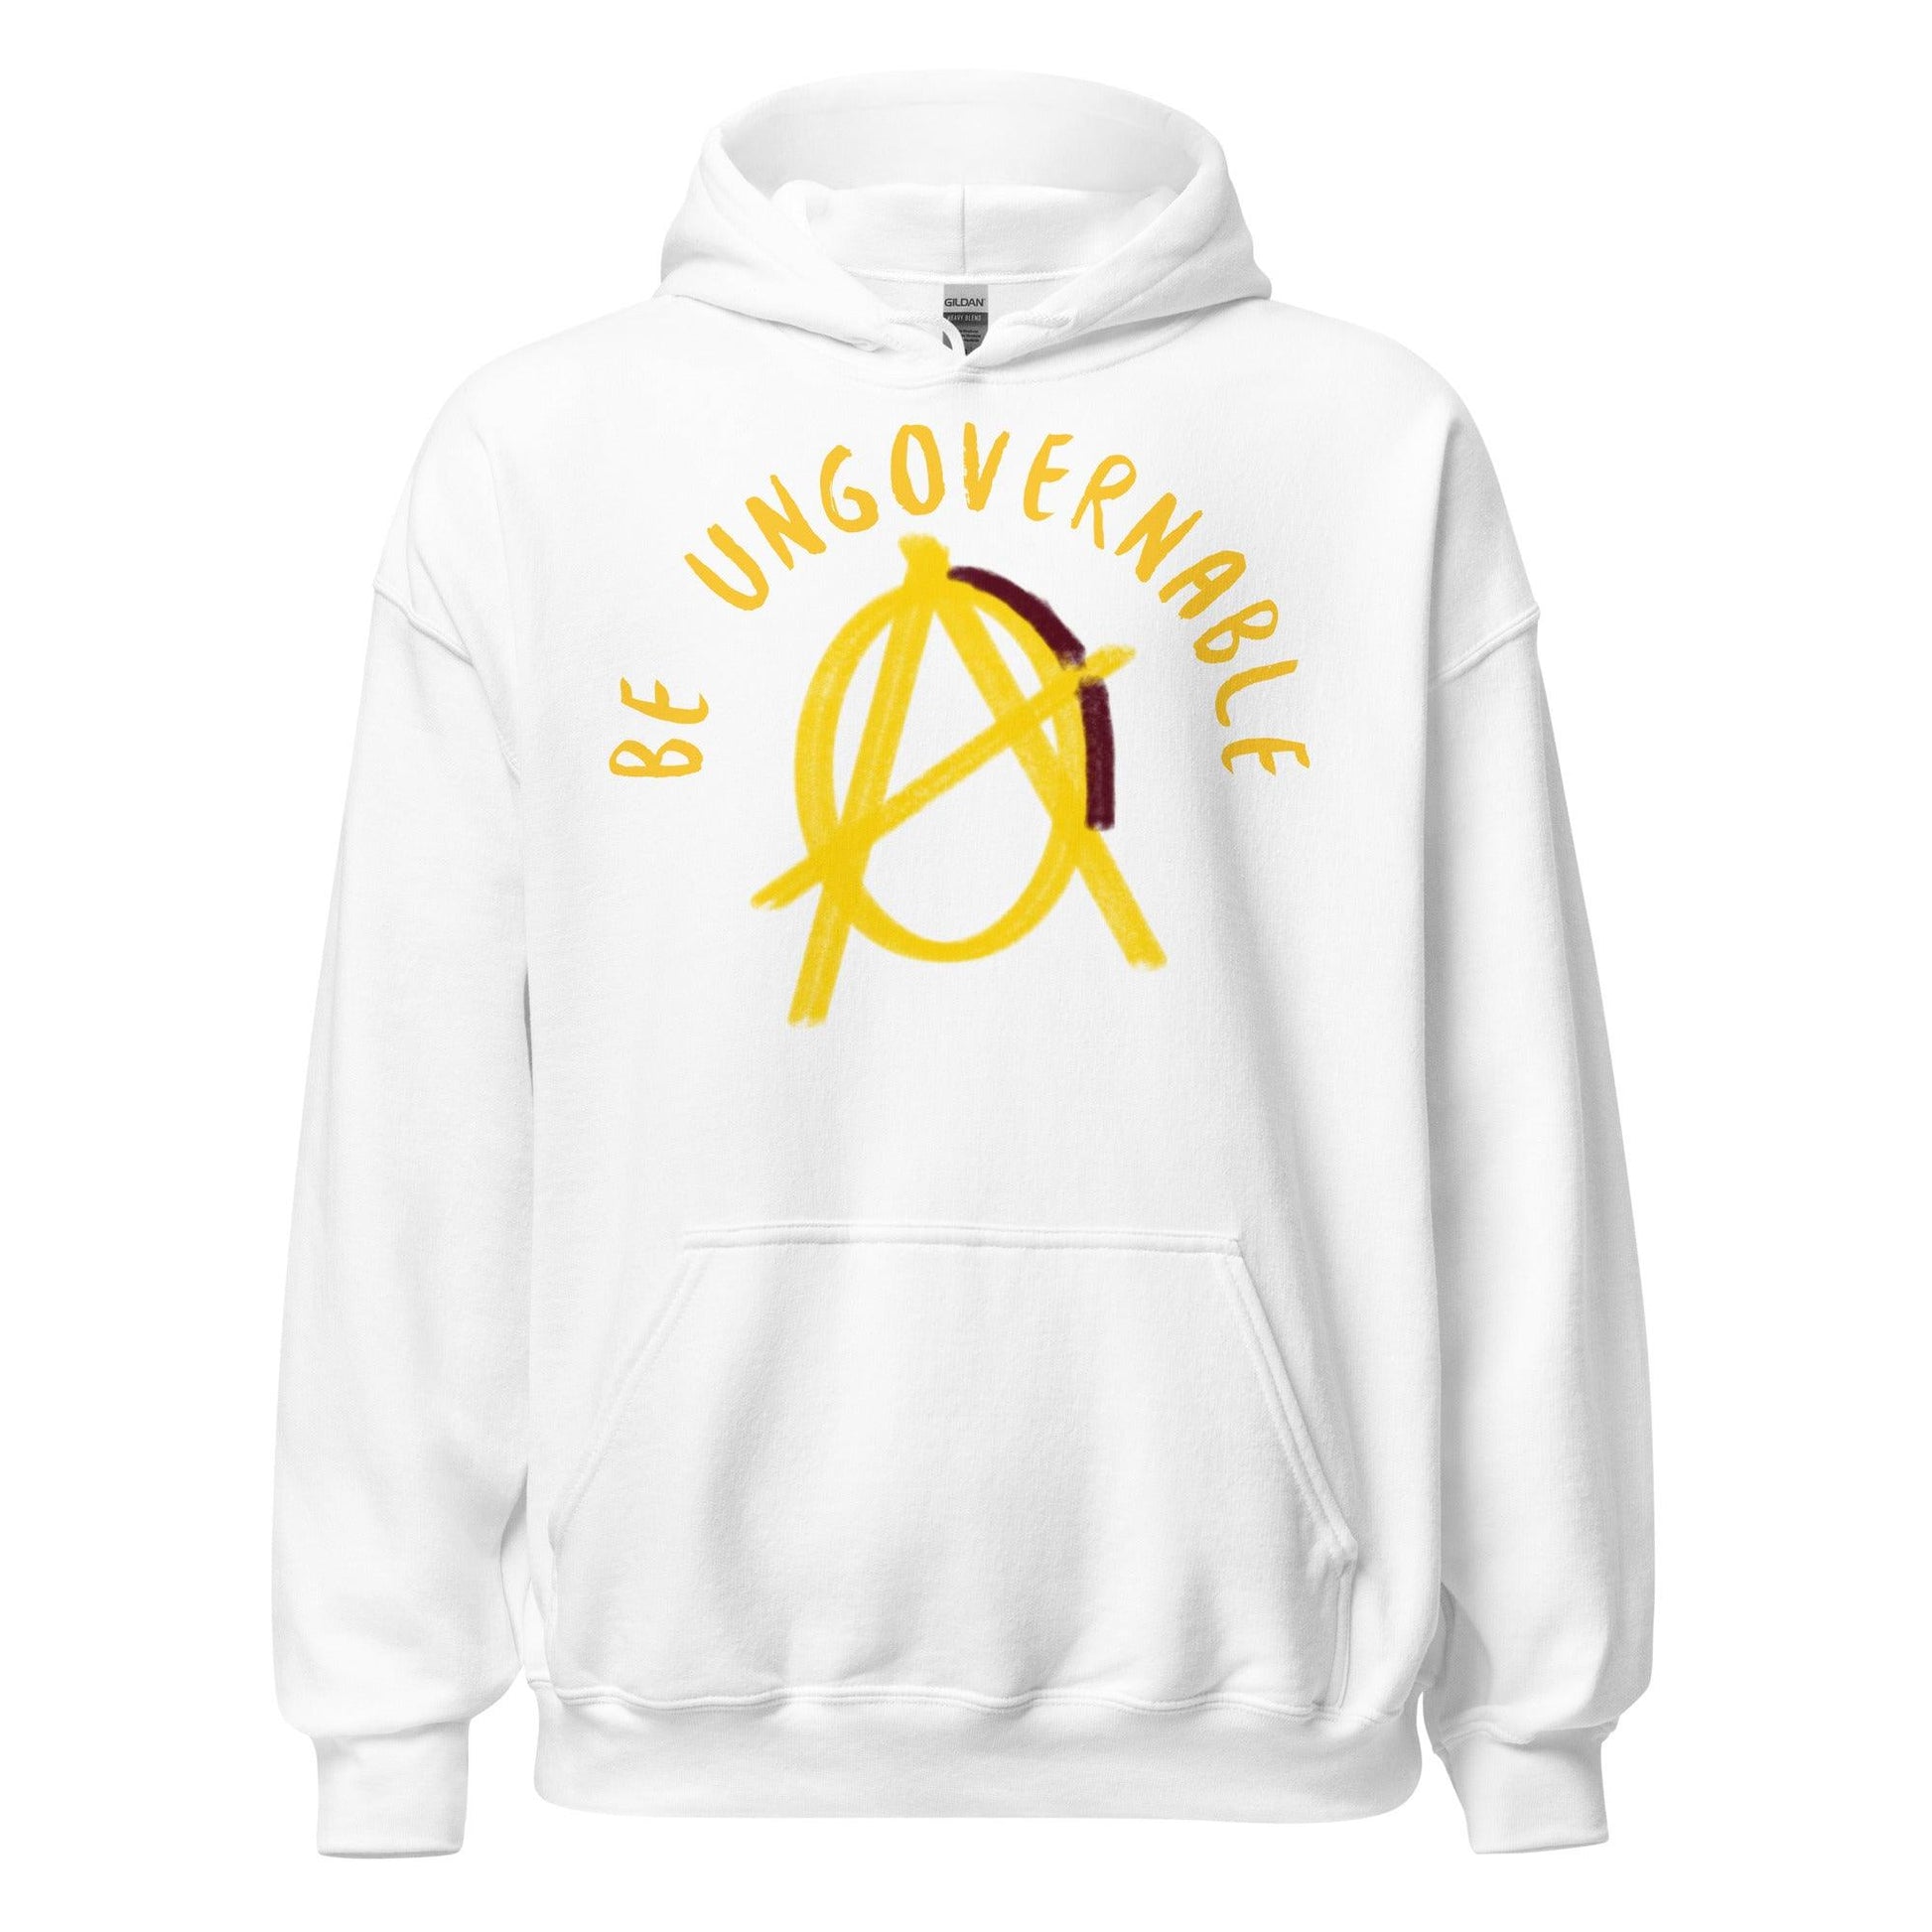 Anarchy Wear Gold "Be Ungovernable" Hoodie - AnarchyWear